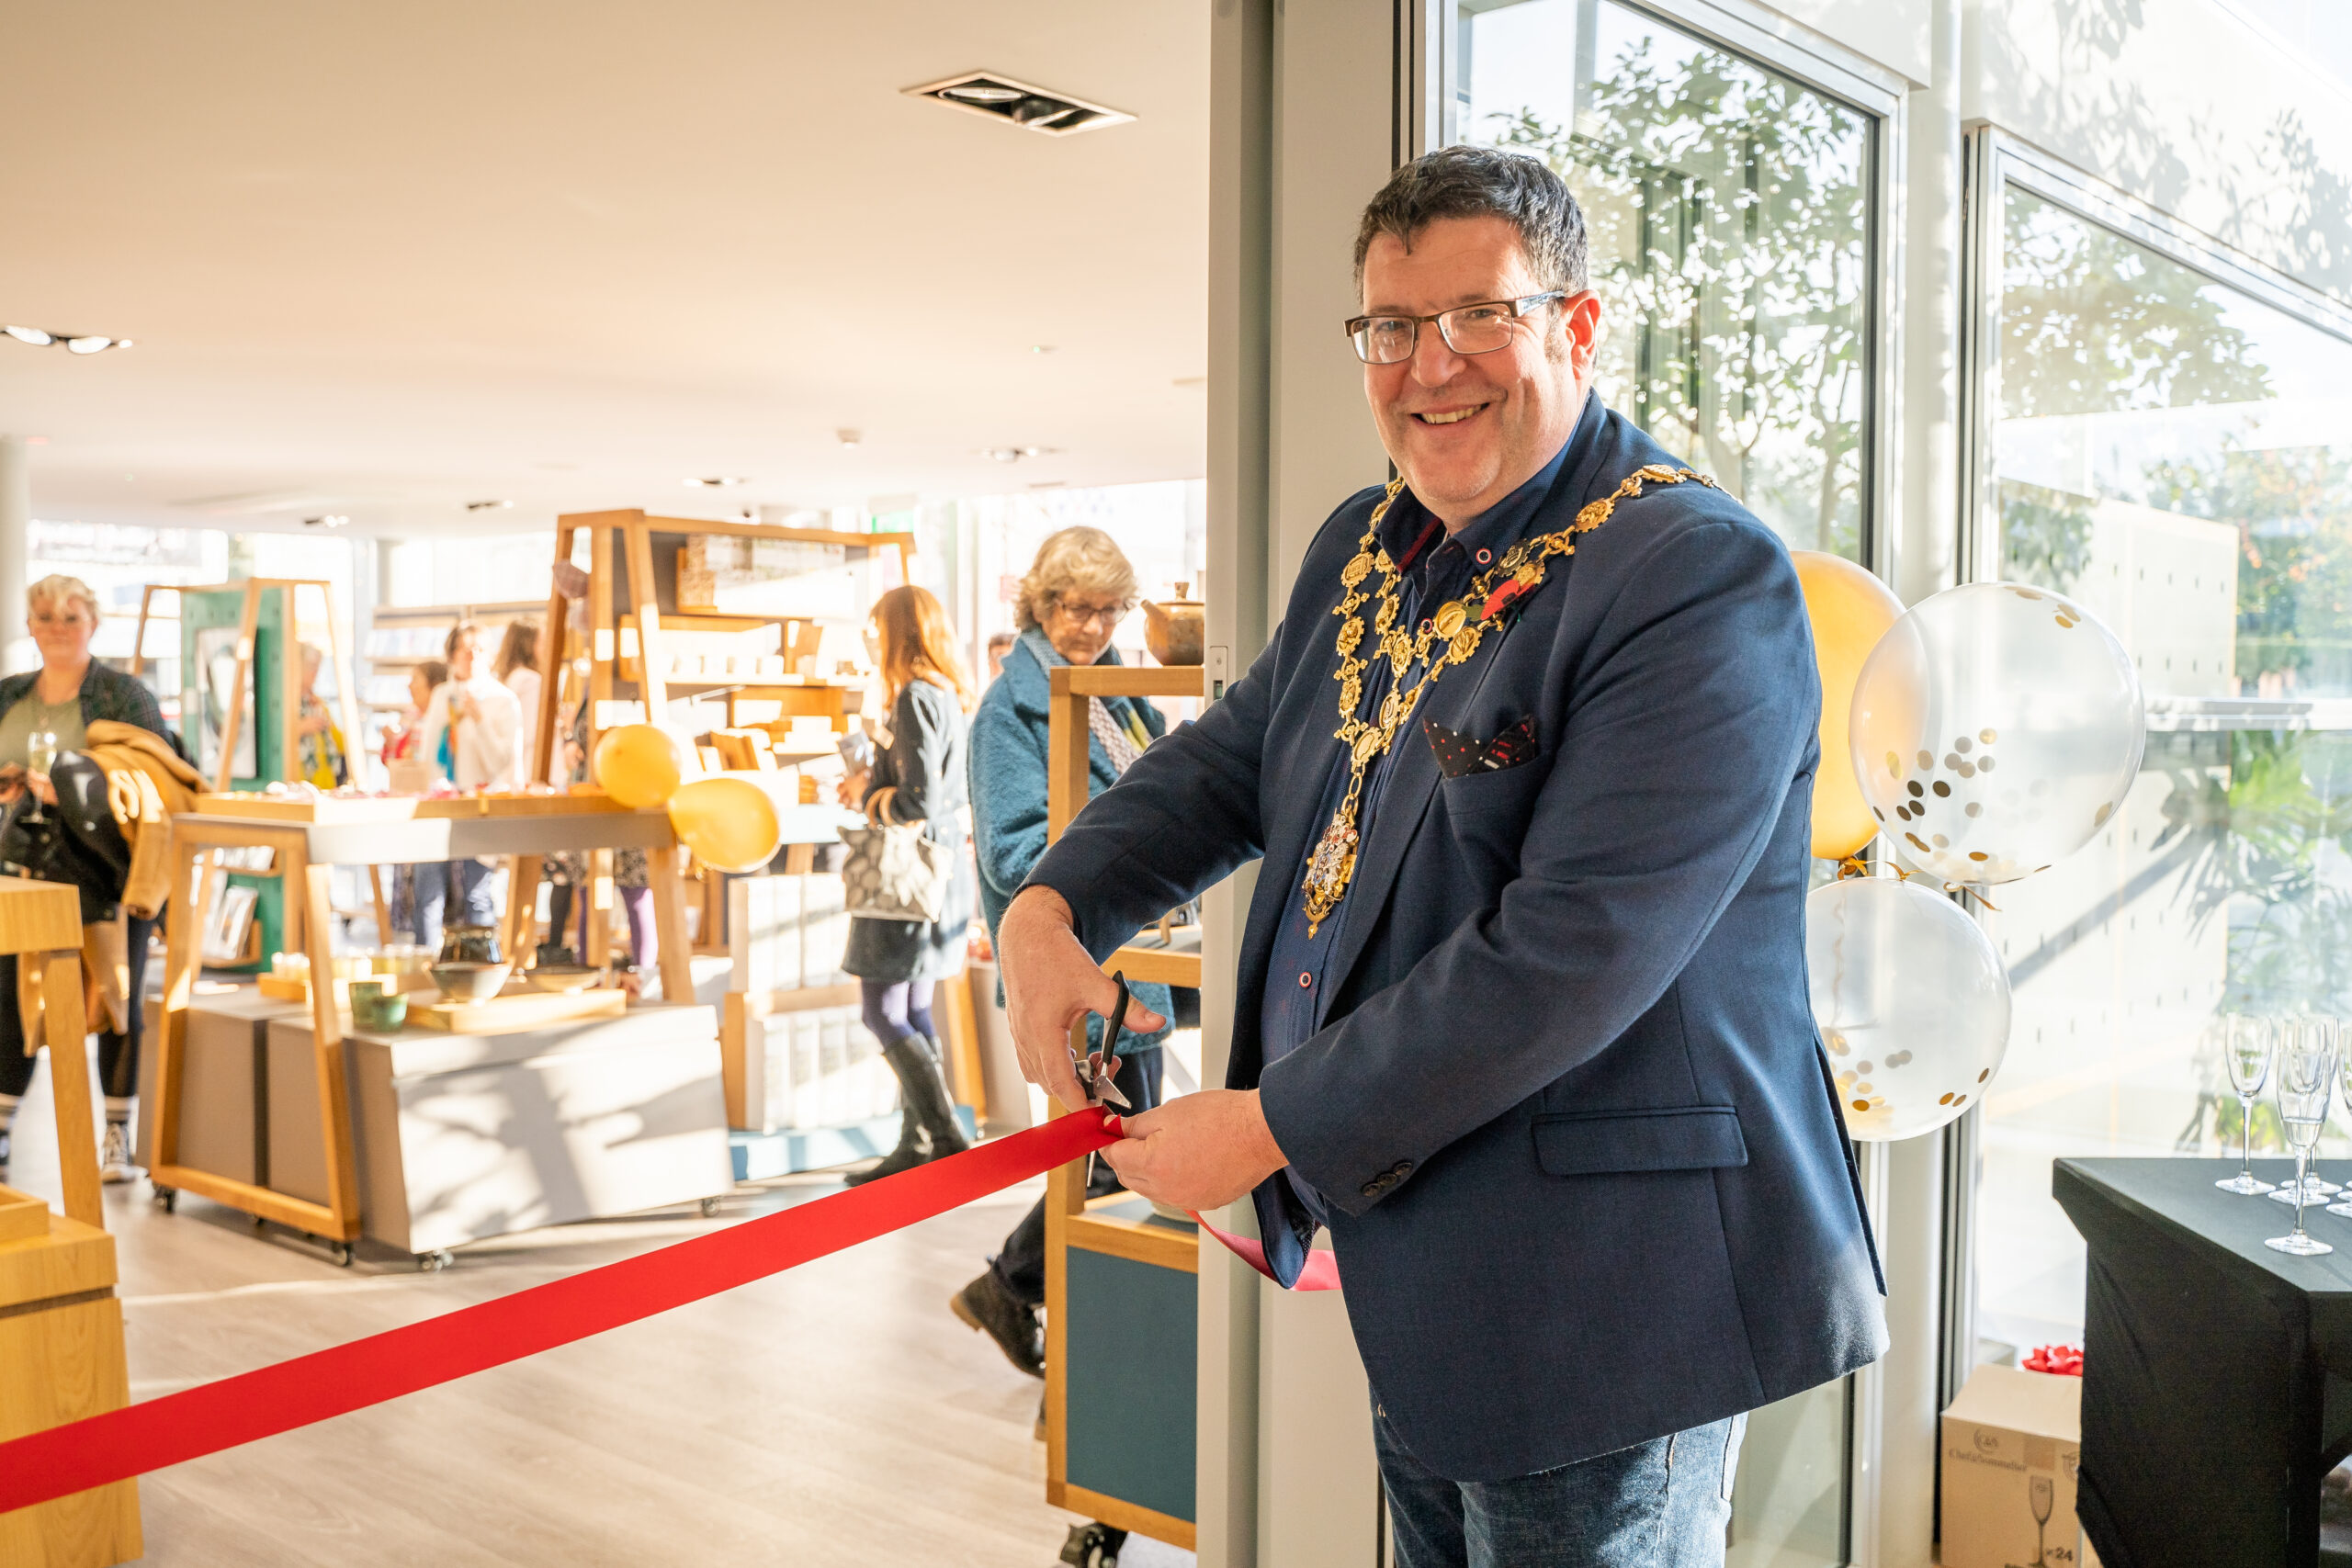 The Right Worshipful the Mayor of Hereford, Councillor Paul Stevens cutting a red ribbon in front of the shop doorway, smiling at the camera